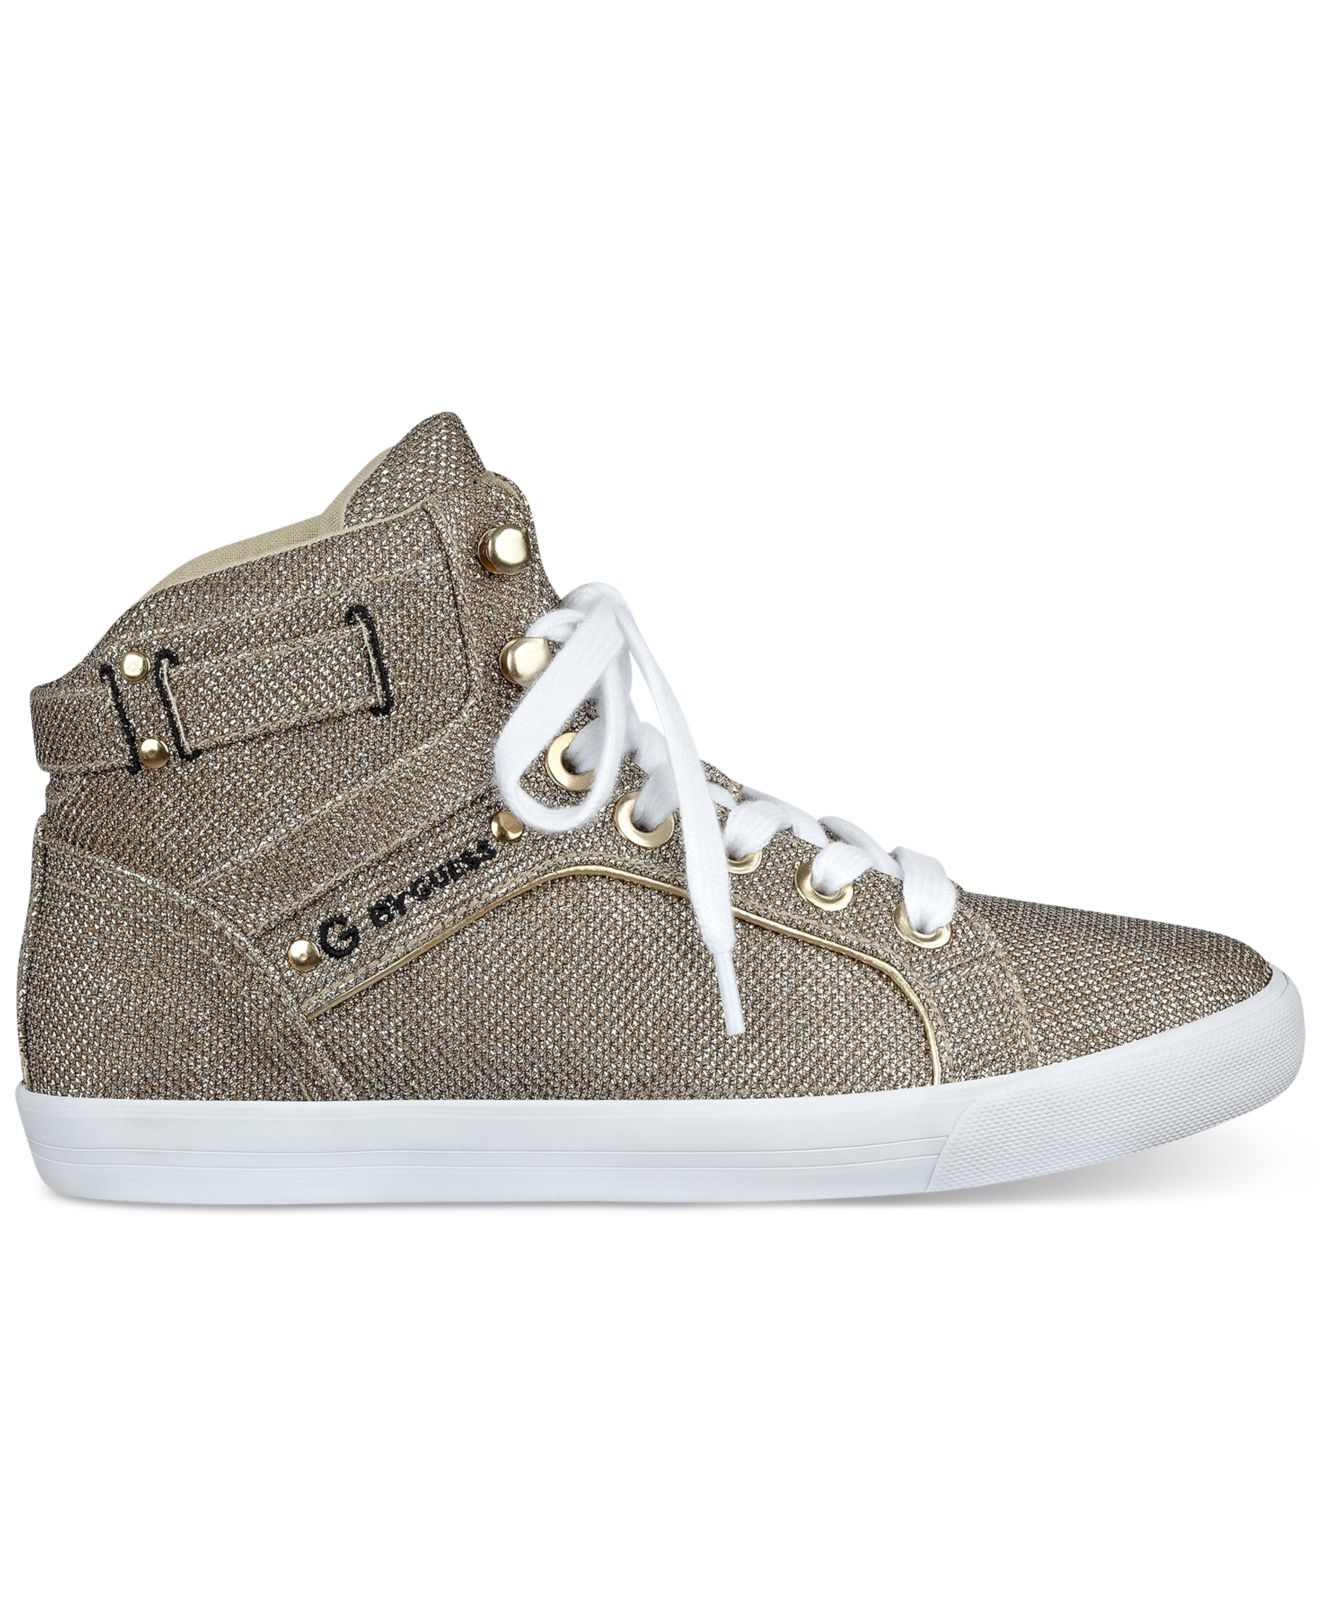 G by Guess Opall High Top Sneakers in 